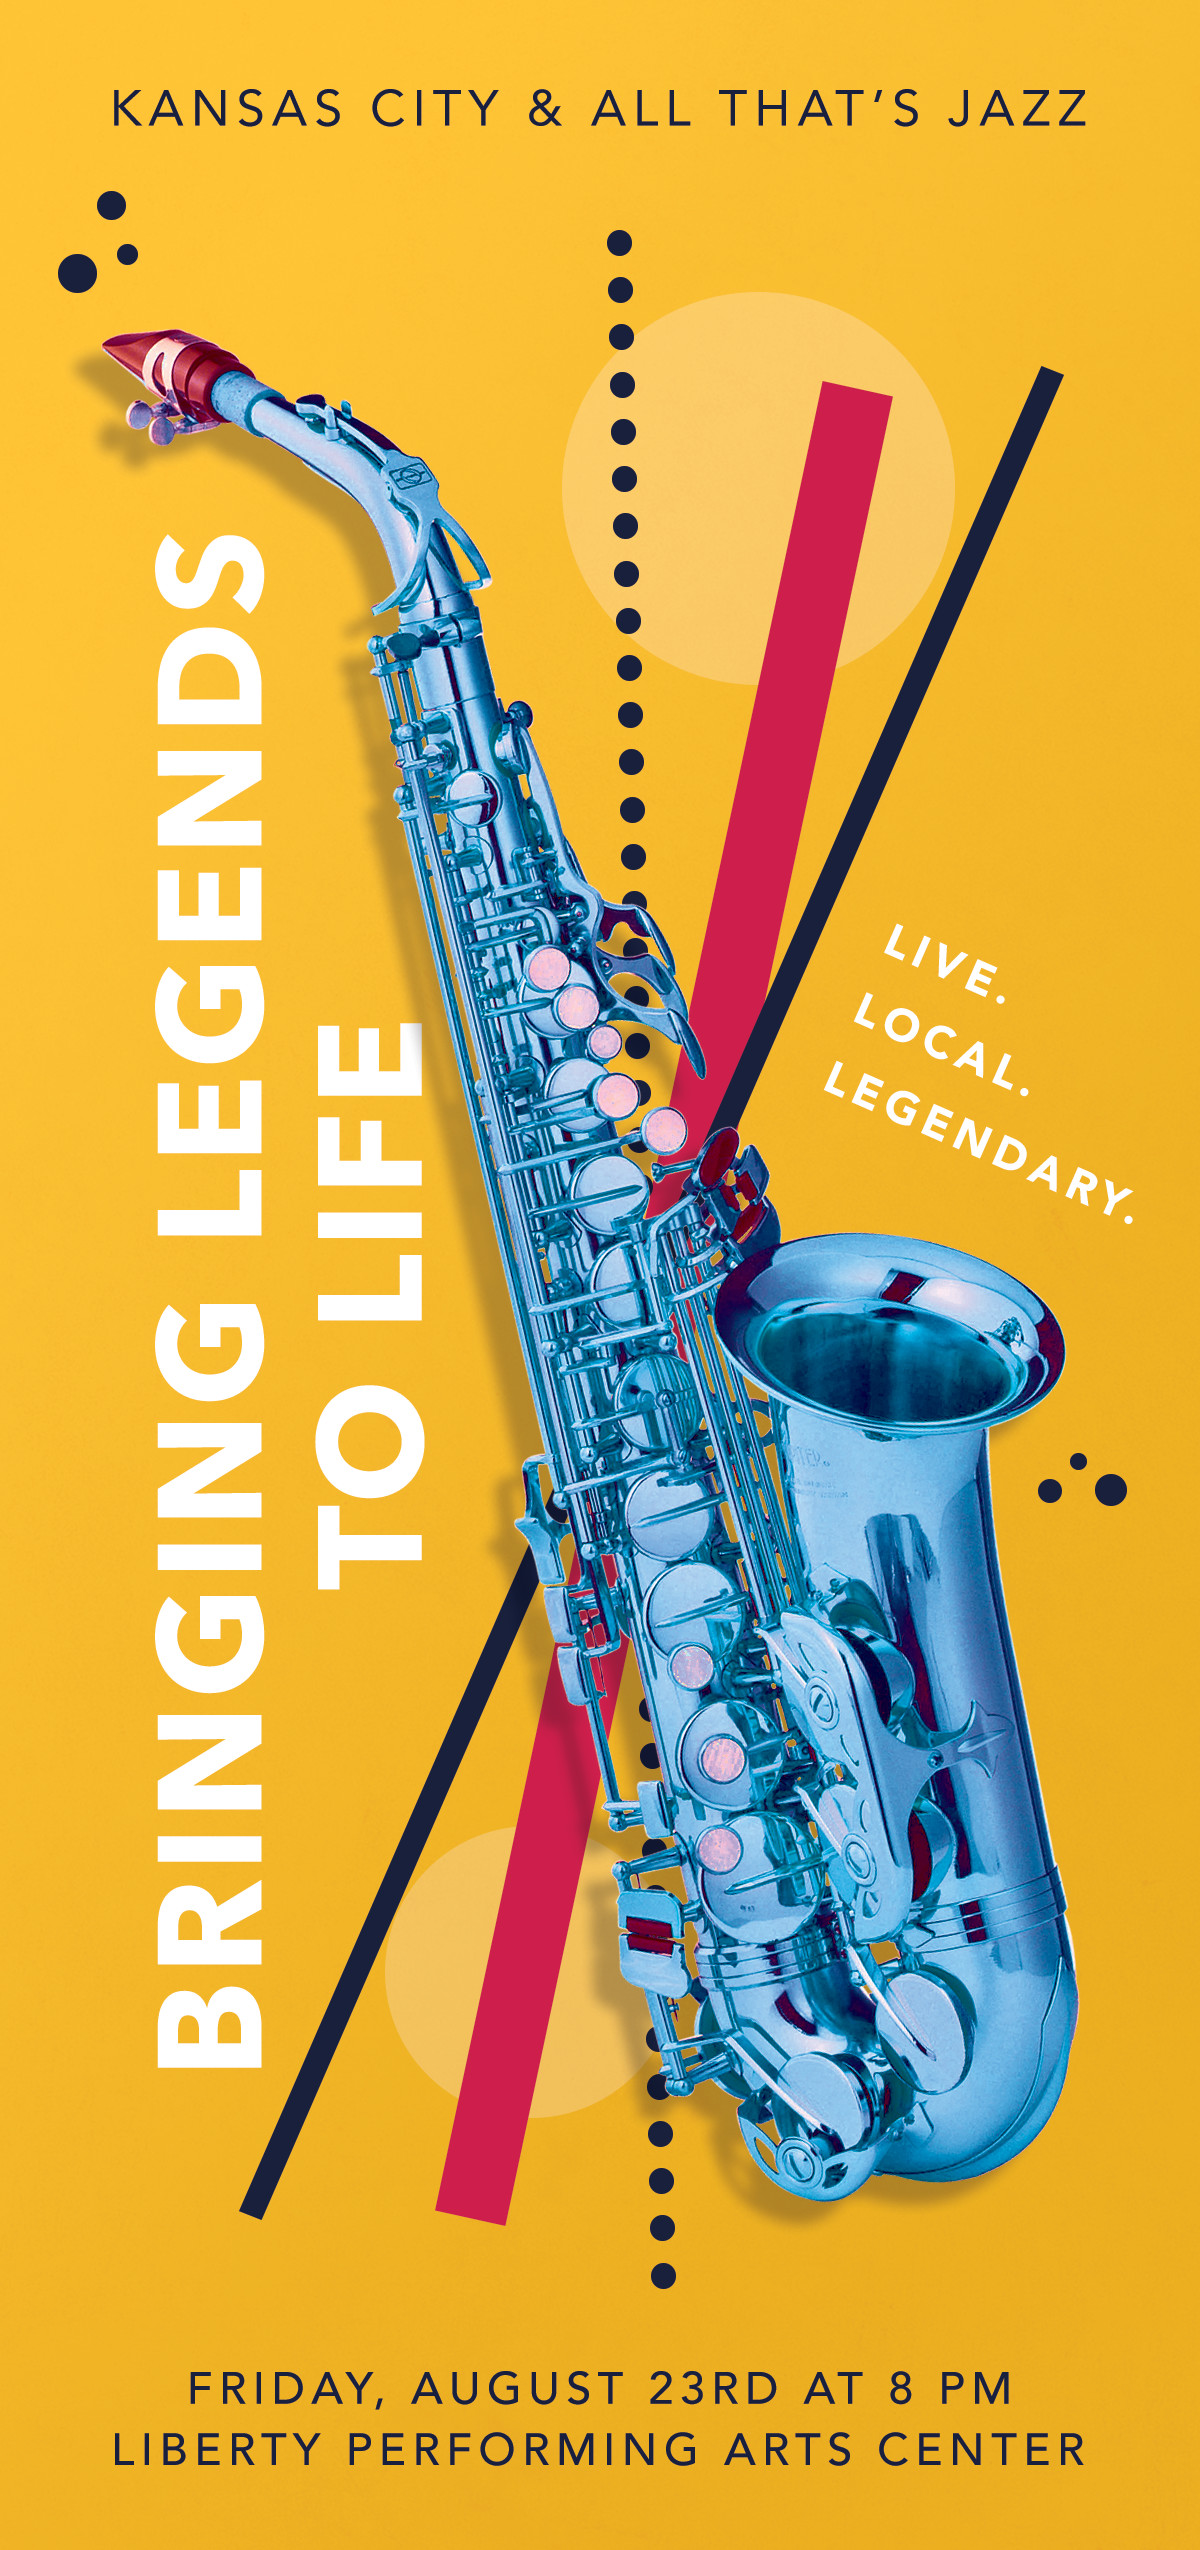 Kansas City and All That’s Jazz: Bringing Legends to Life at Liberty Performing Arts Theatre – TICKETS FOR SALE